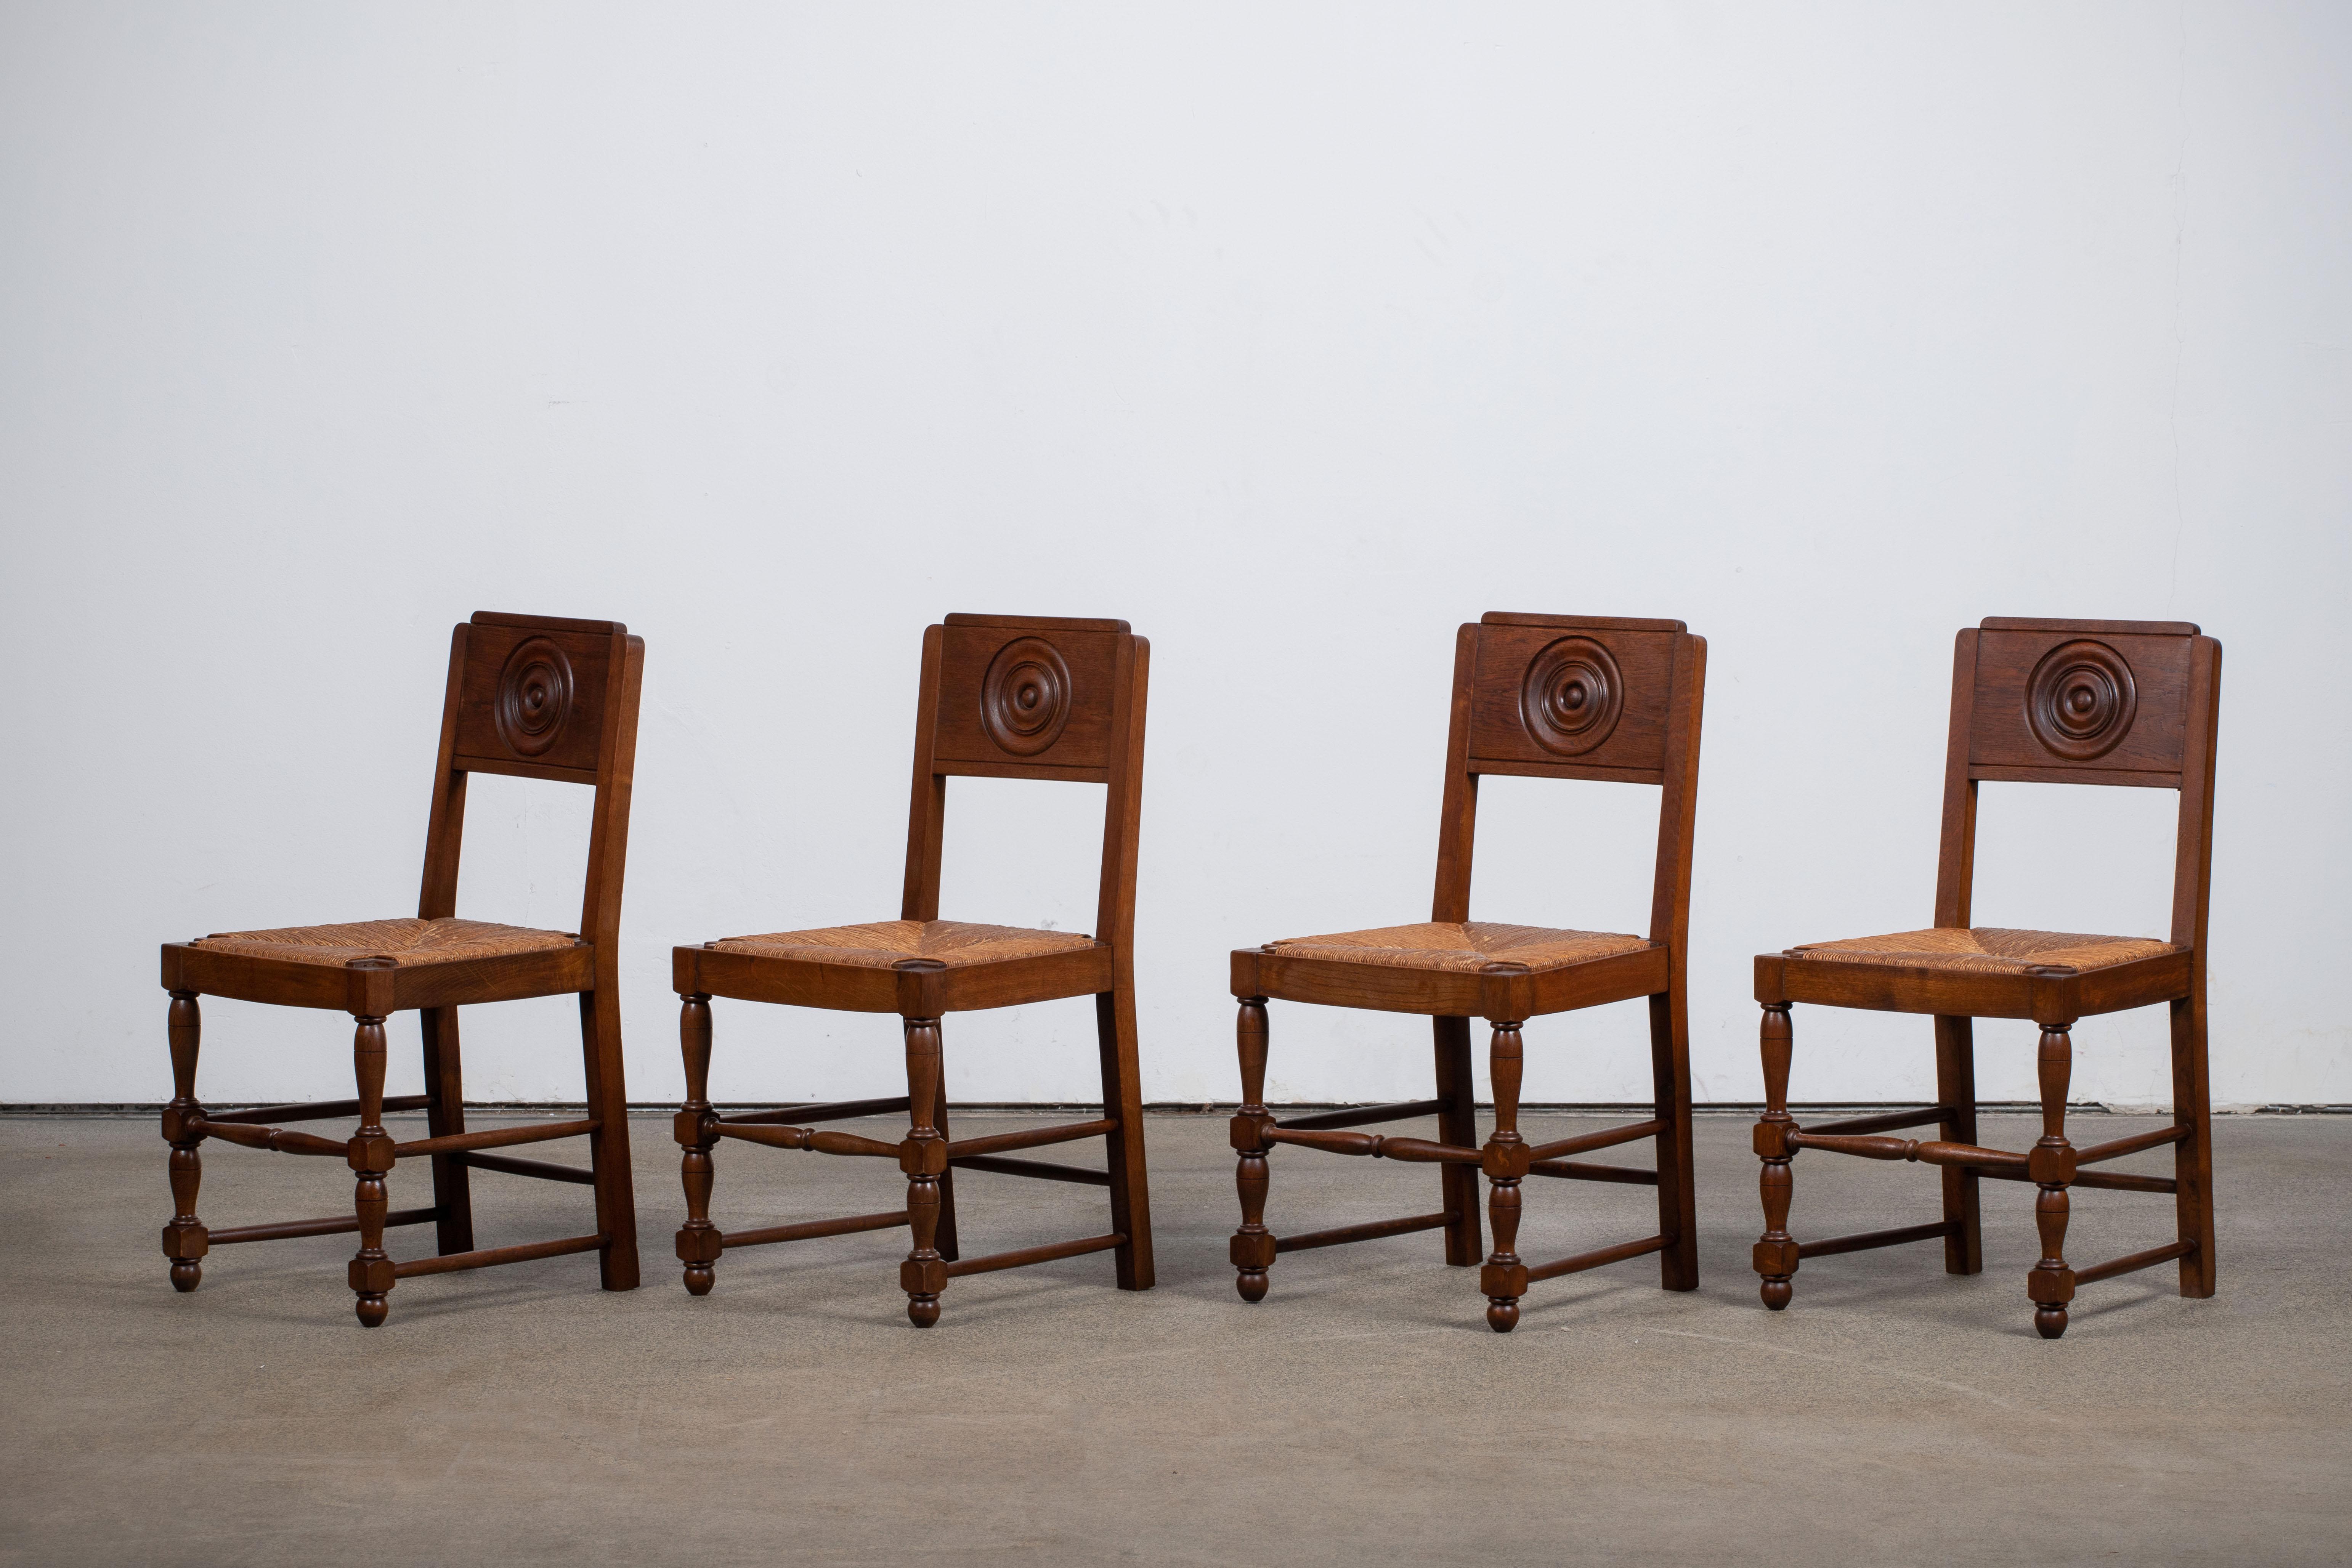 Art Deco Set of 6 Chairs, Dudouyt Insp. France, 1940 For Sale 1